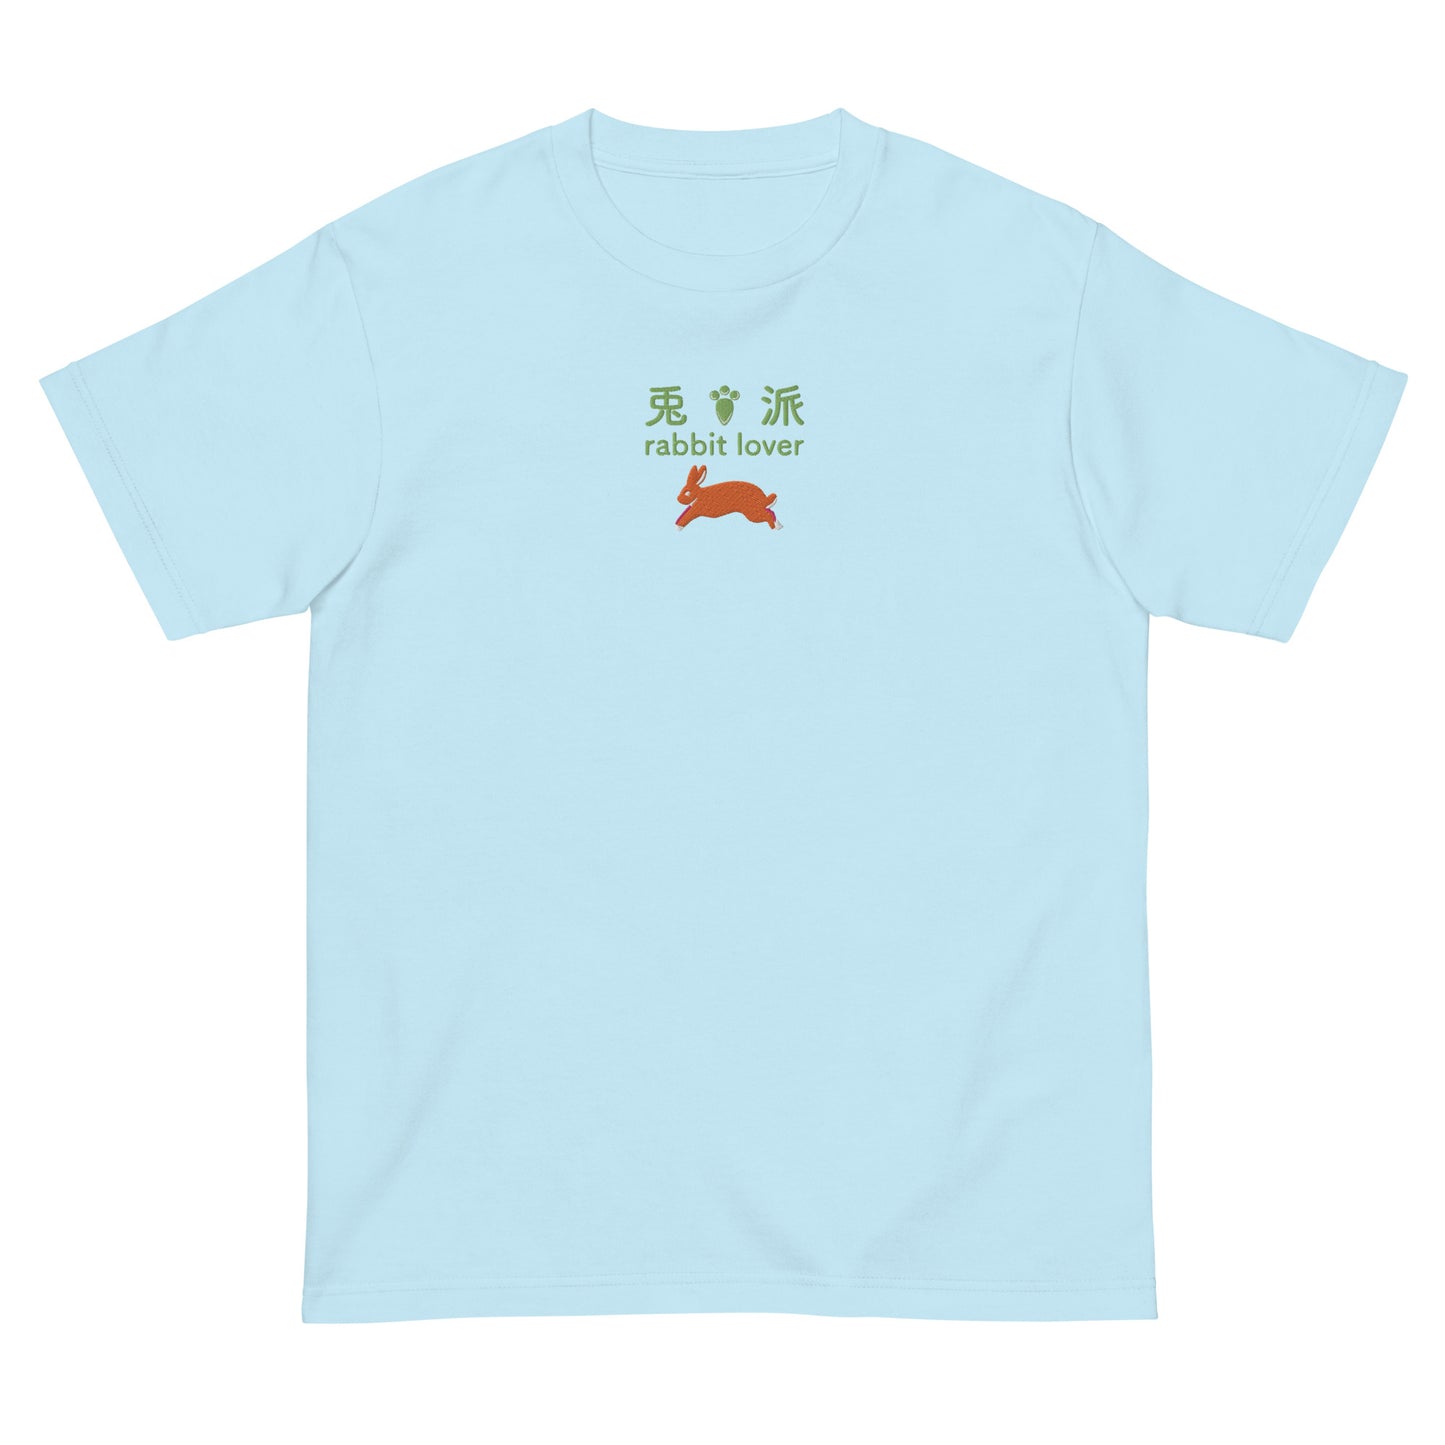 Light Blue High Quality Tee - Front Design with an Gray, White Embroidery "Rabbit Lover" in Japanese,Chinese and English, and Rabbit Embroidery